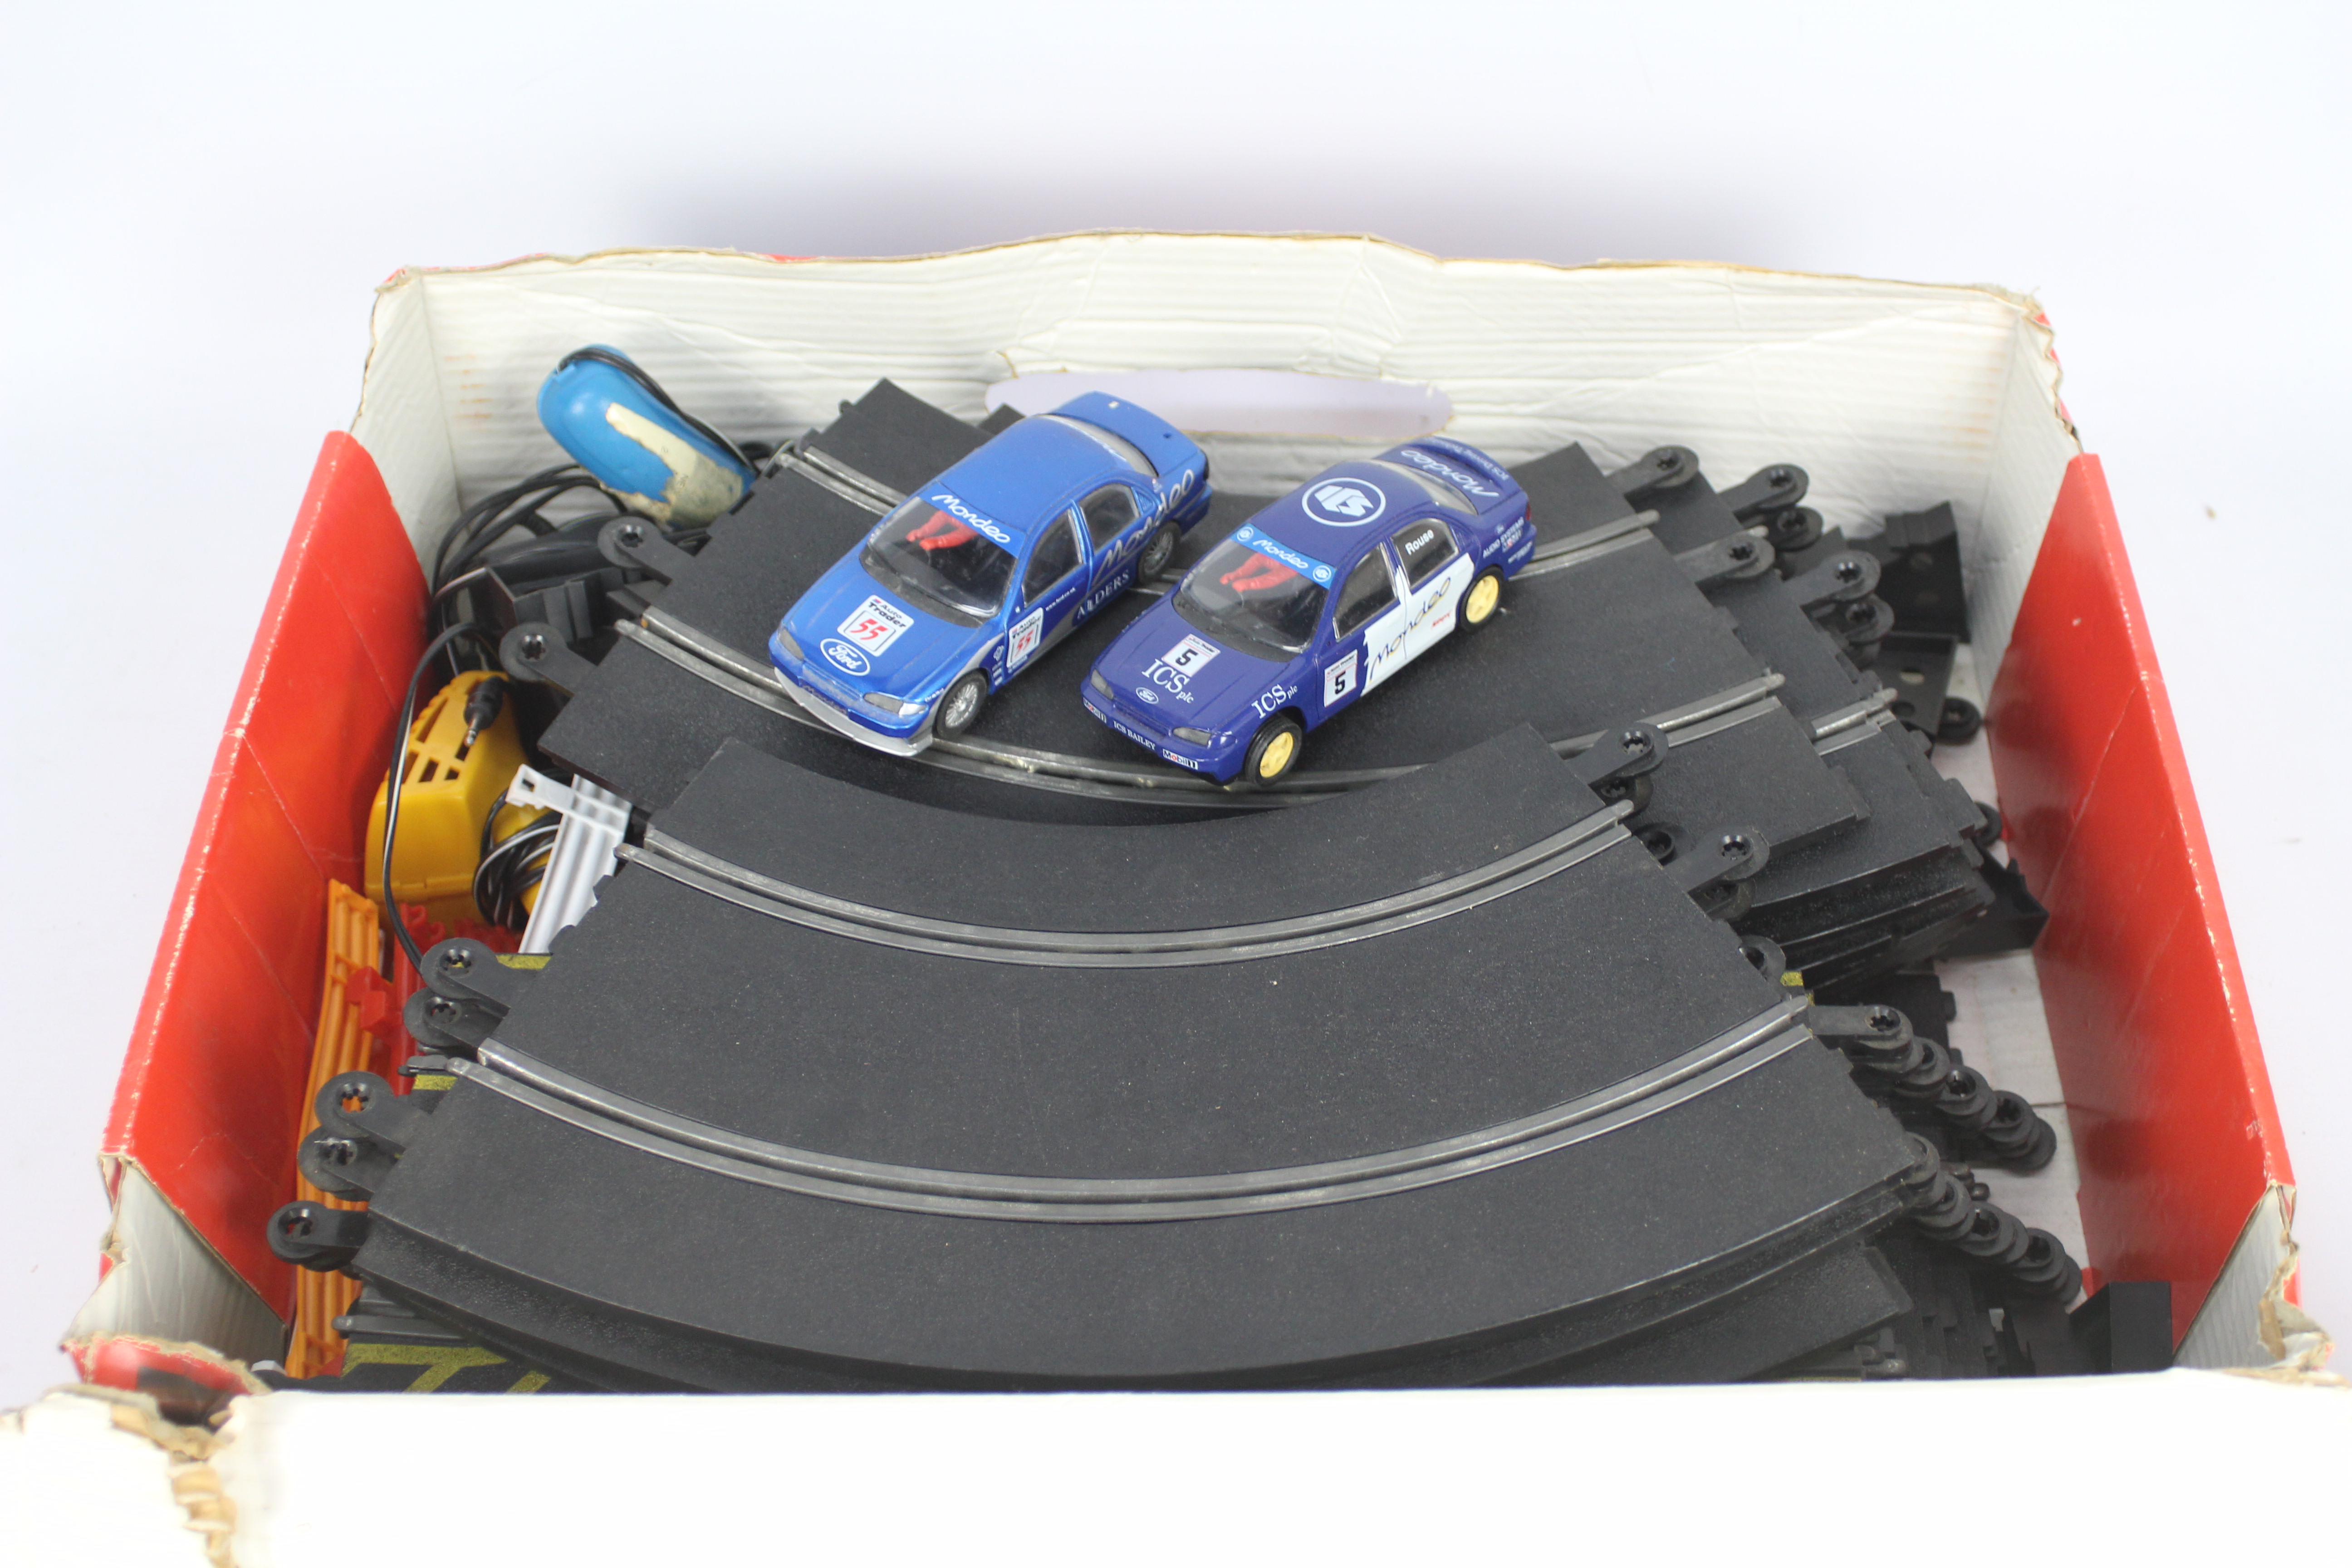 Scalextric - 2 x boxed sets # C805 Eurocars and # C650 Banger Raceway. - Image 4 of 5